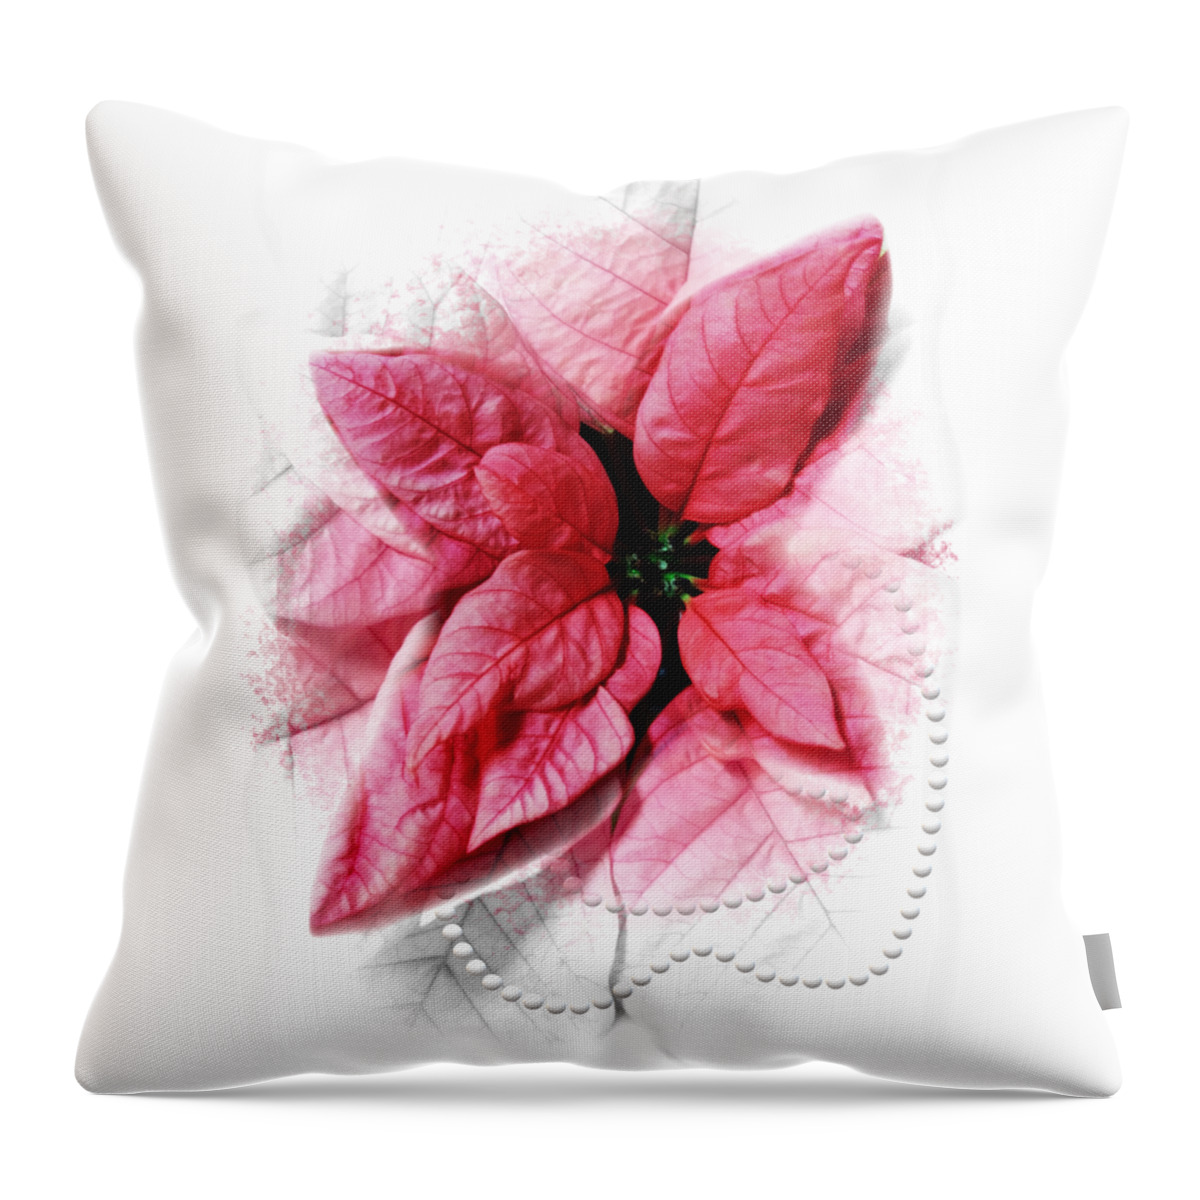 2020 Throw Pillow featuring the digital art 2020 Pink Poinsettia Color of the Year Gift Idea by Delynn Addams